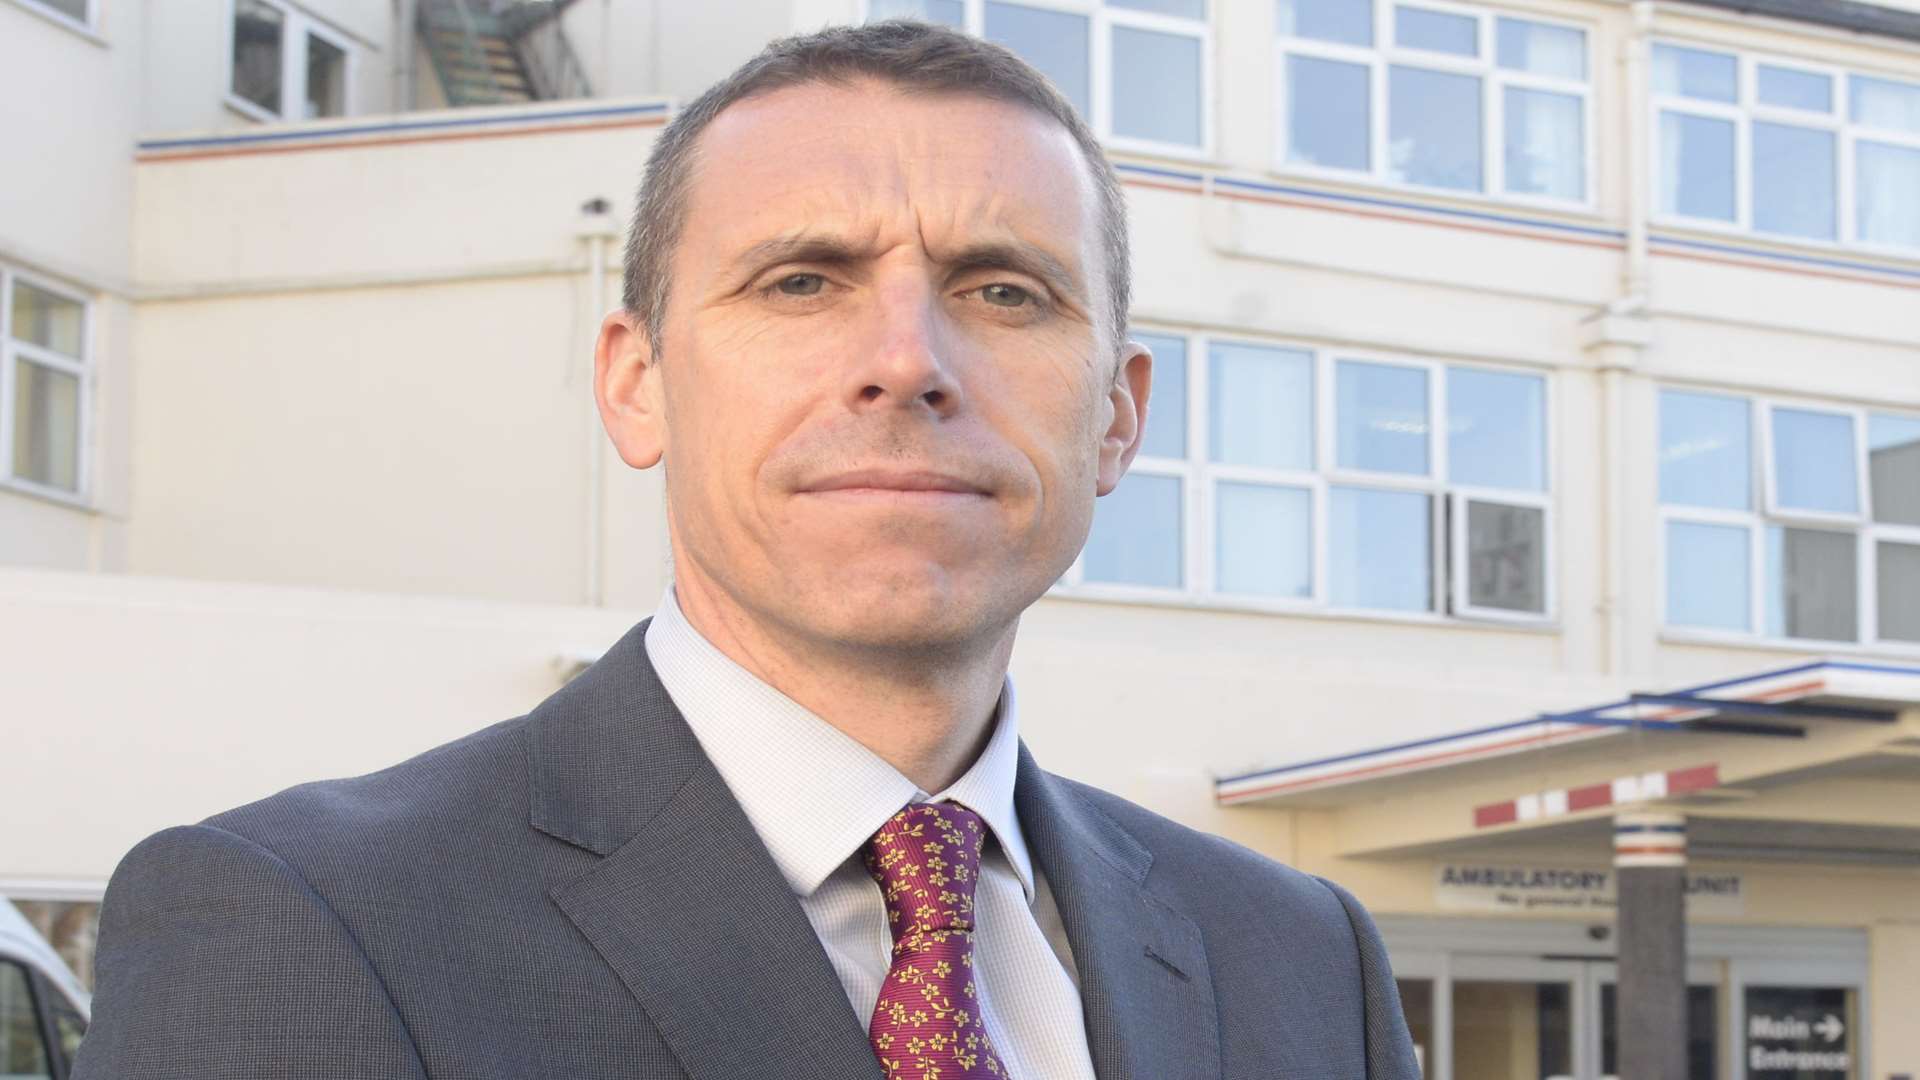 Matthew Kershaw insists the hospitals trust has no firm plans over the future of its sites.